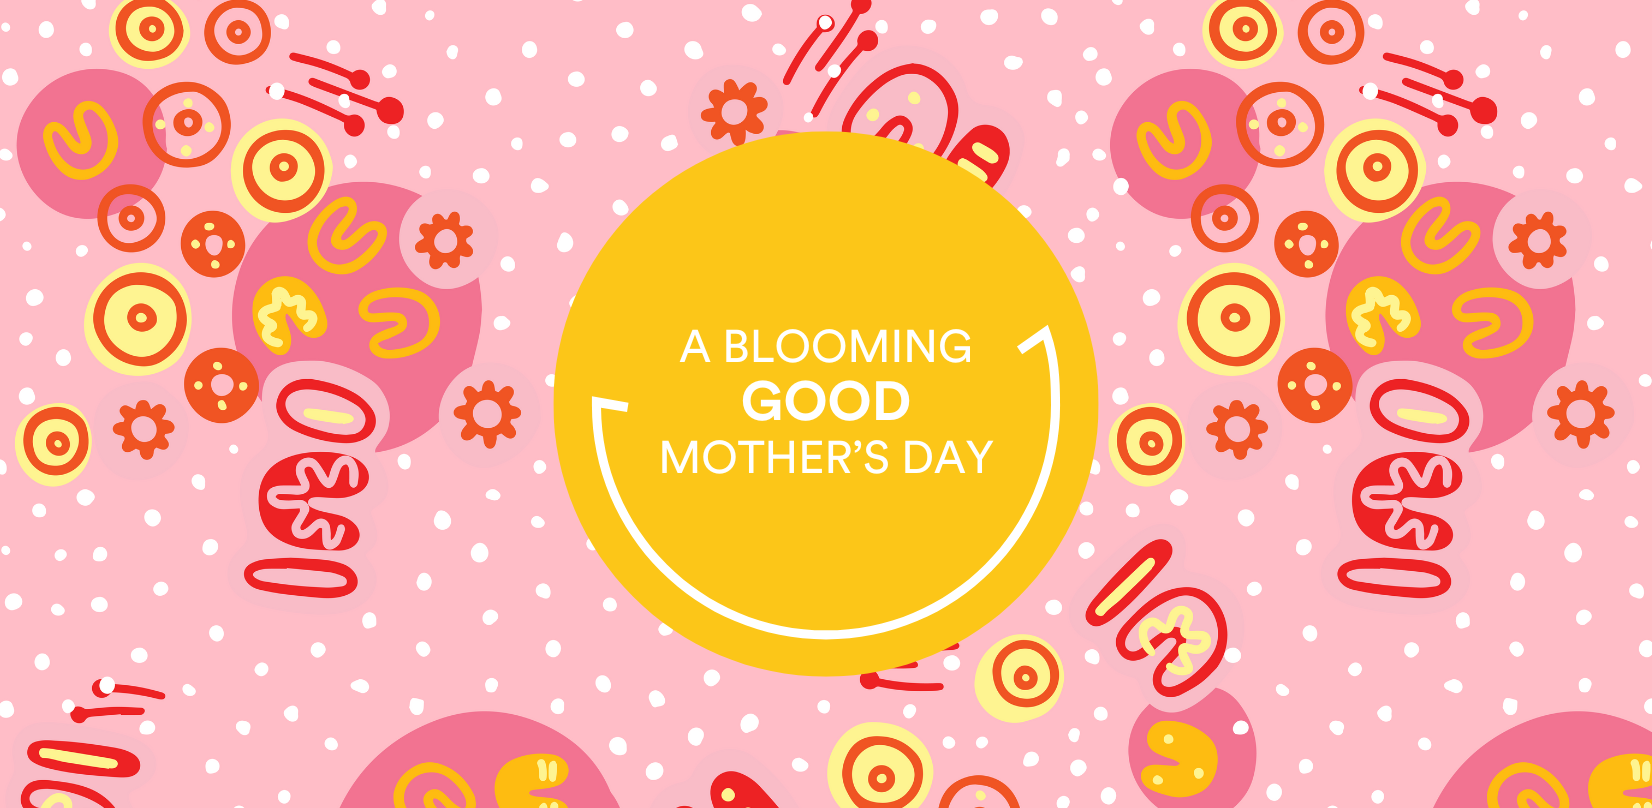 AW24 Mother's Day Web Promo Tile 1652x808px.png